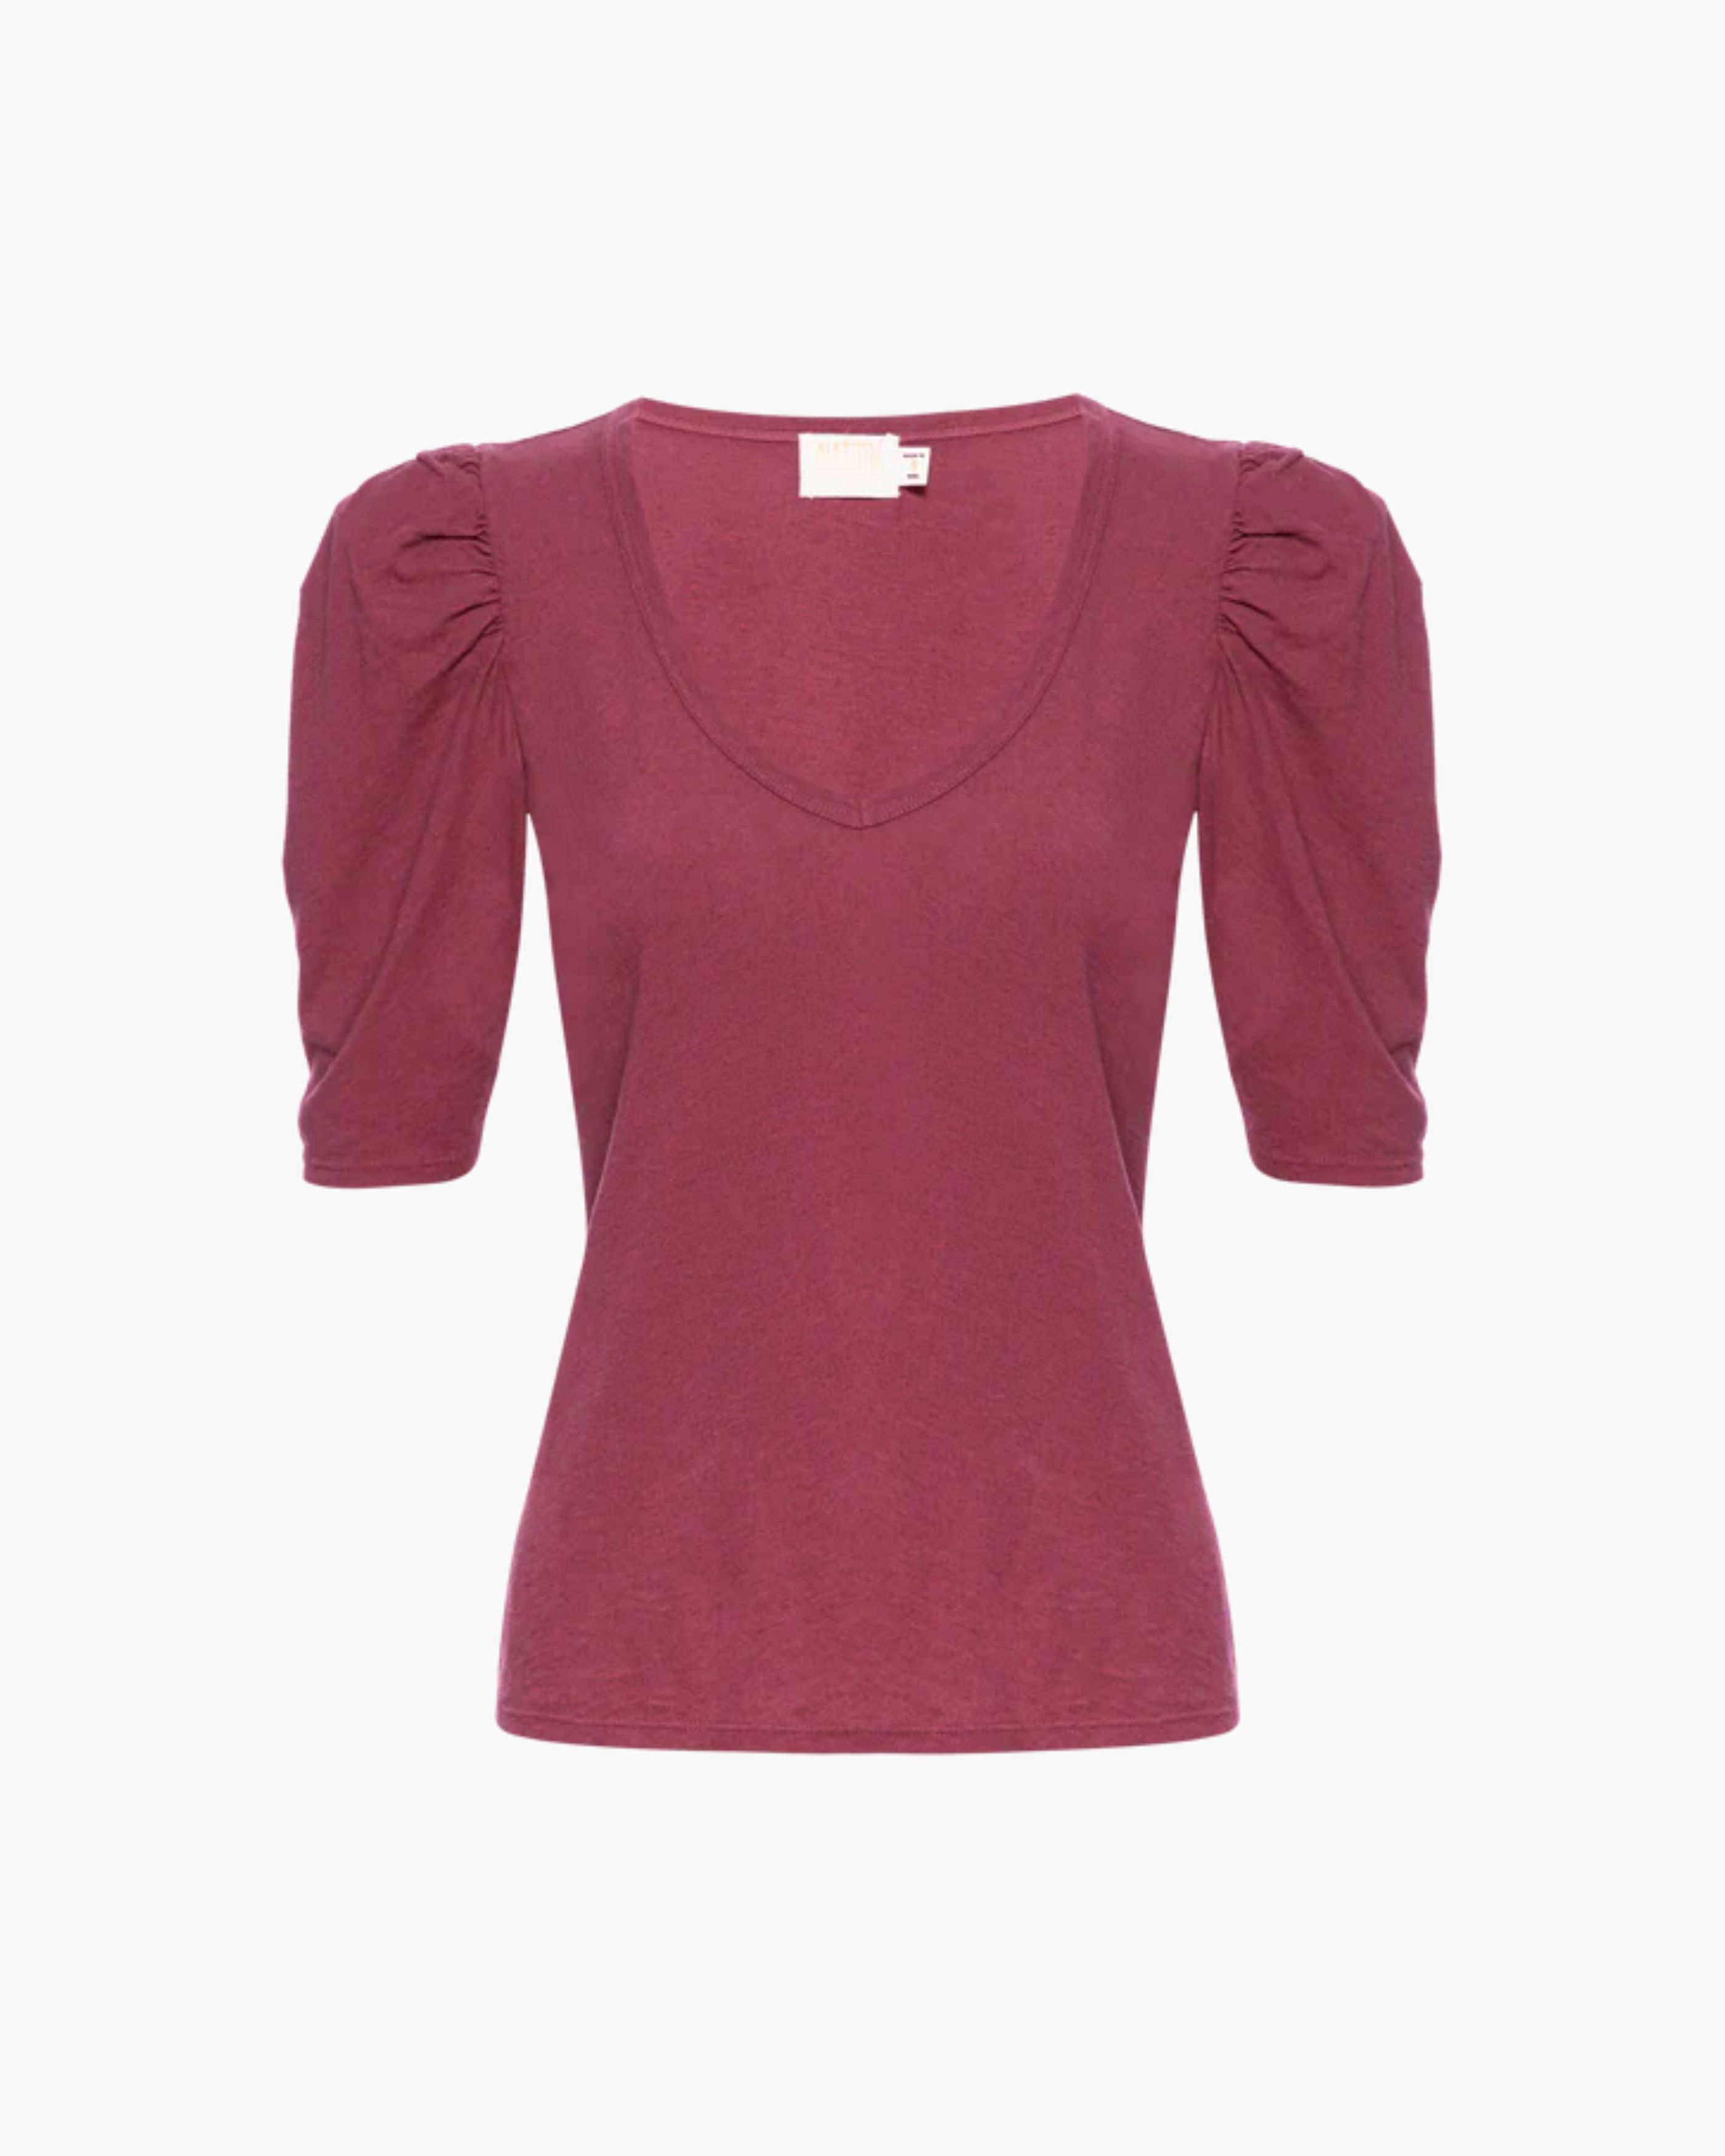 Nation Emily Puff Sleeve Top in Prune